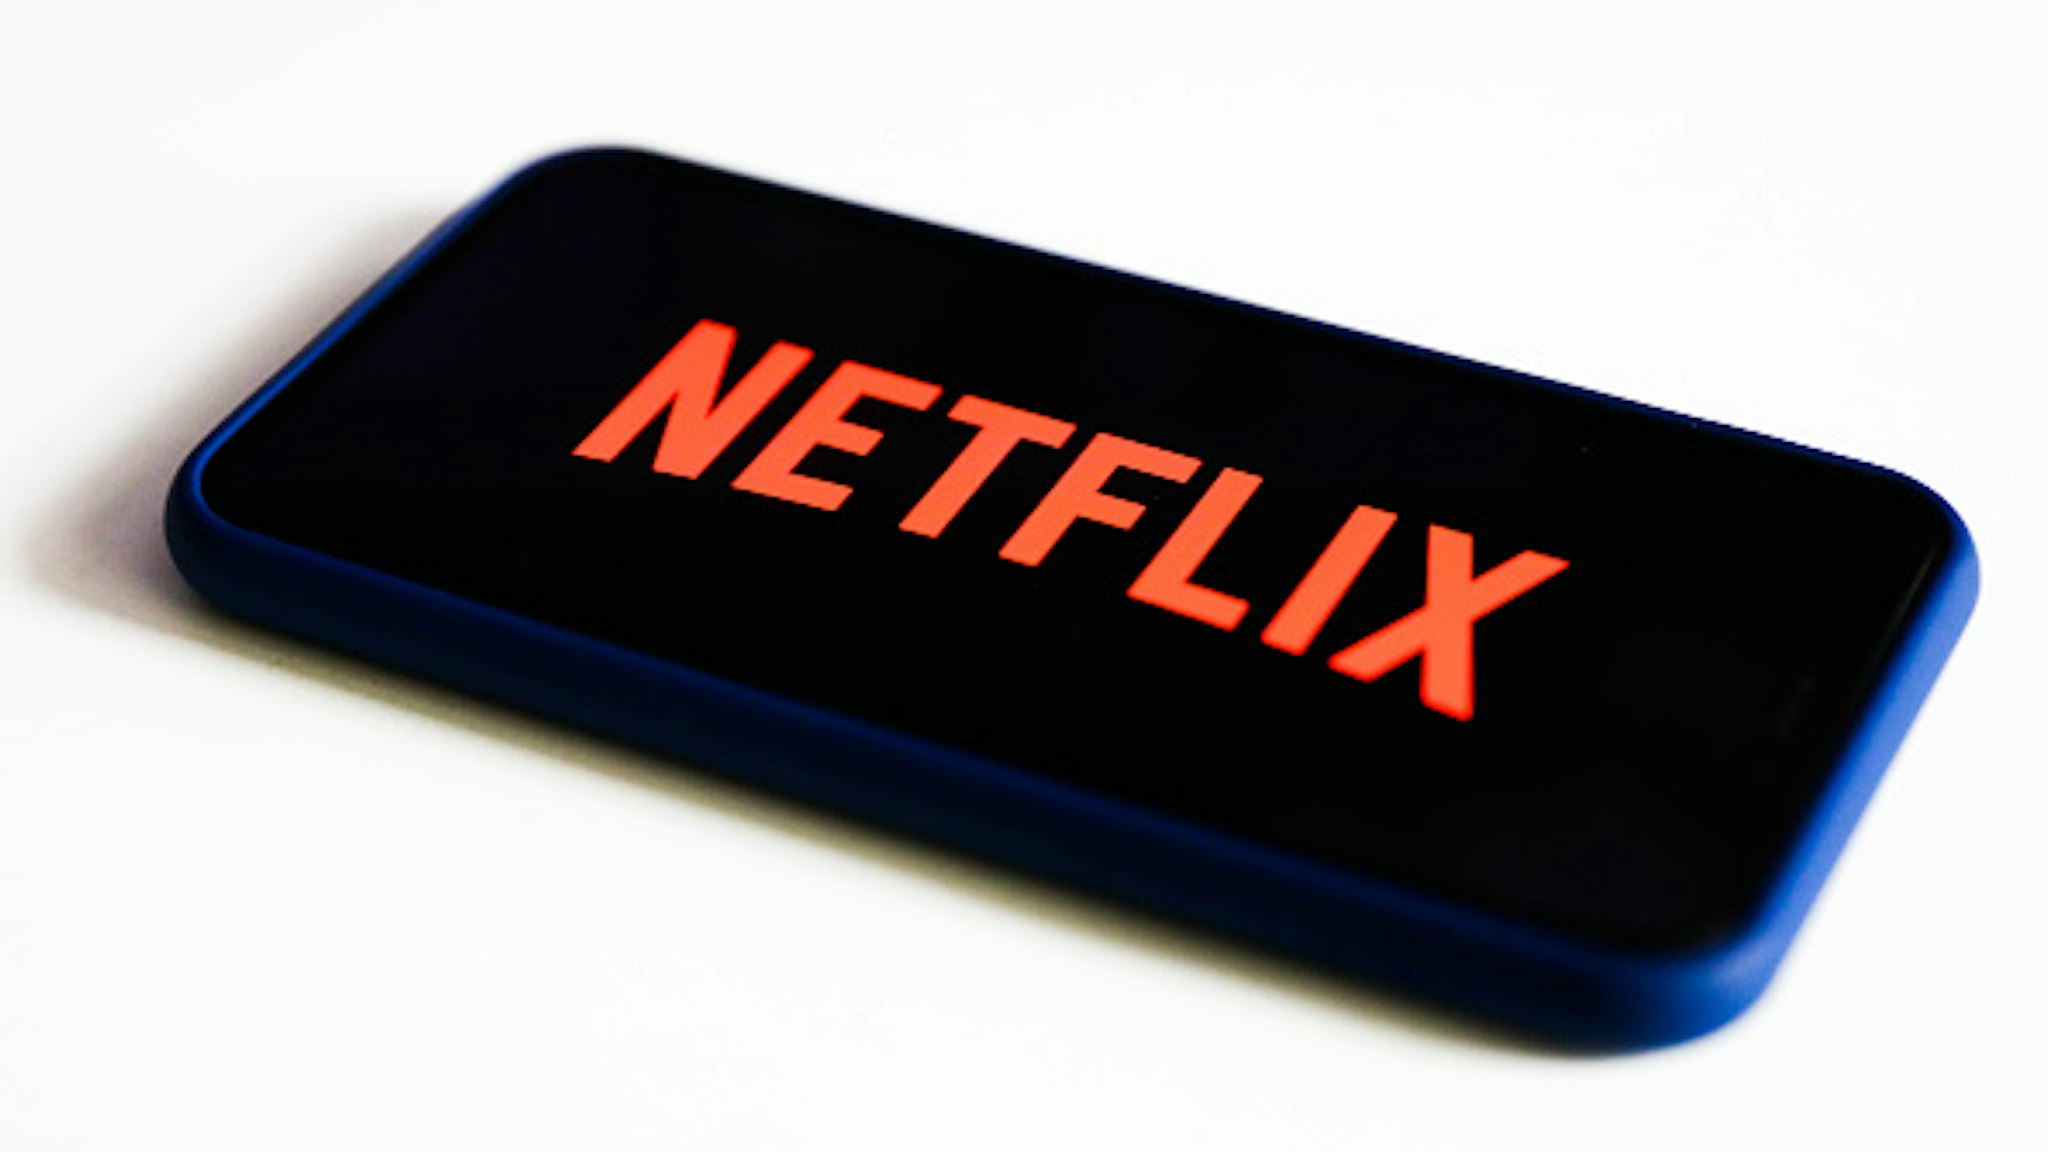 Netflix logo is seen displayed on phone screen in this illustration photo taken in Poland on July 17, 2020. On-Demand streaming services gained popularity and new subscribers during the coronavirus pandemic.